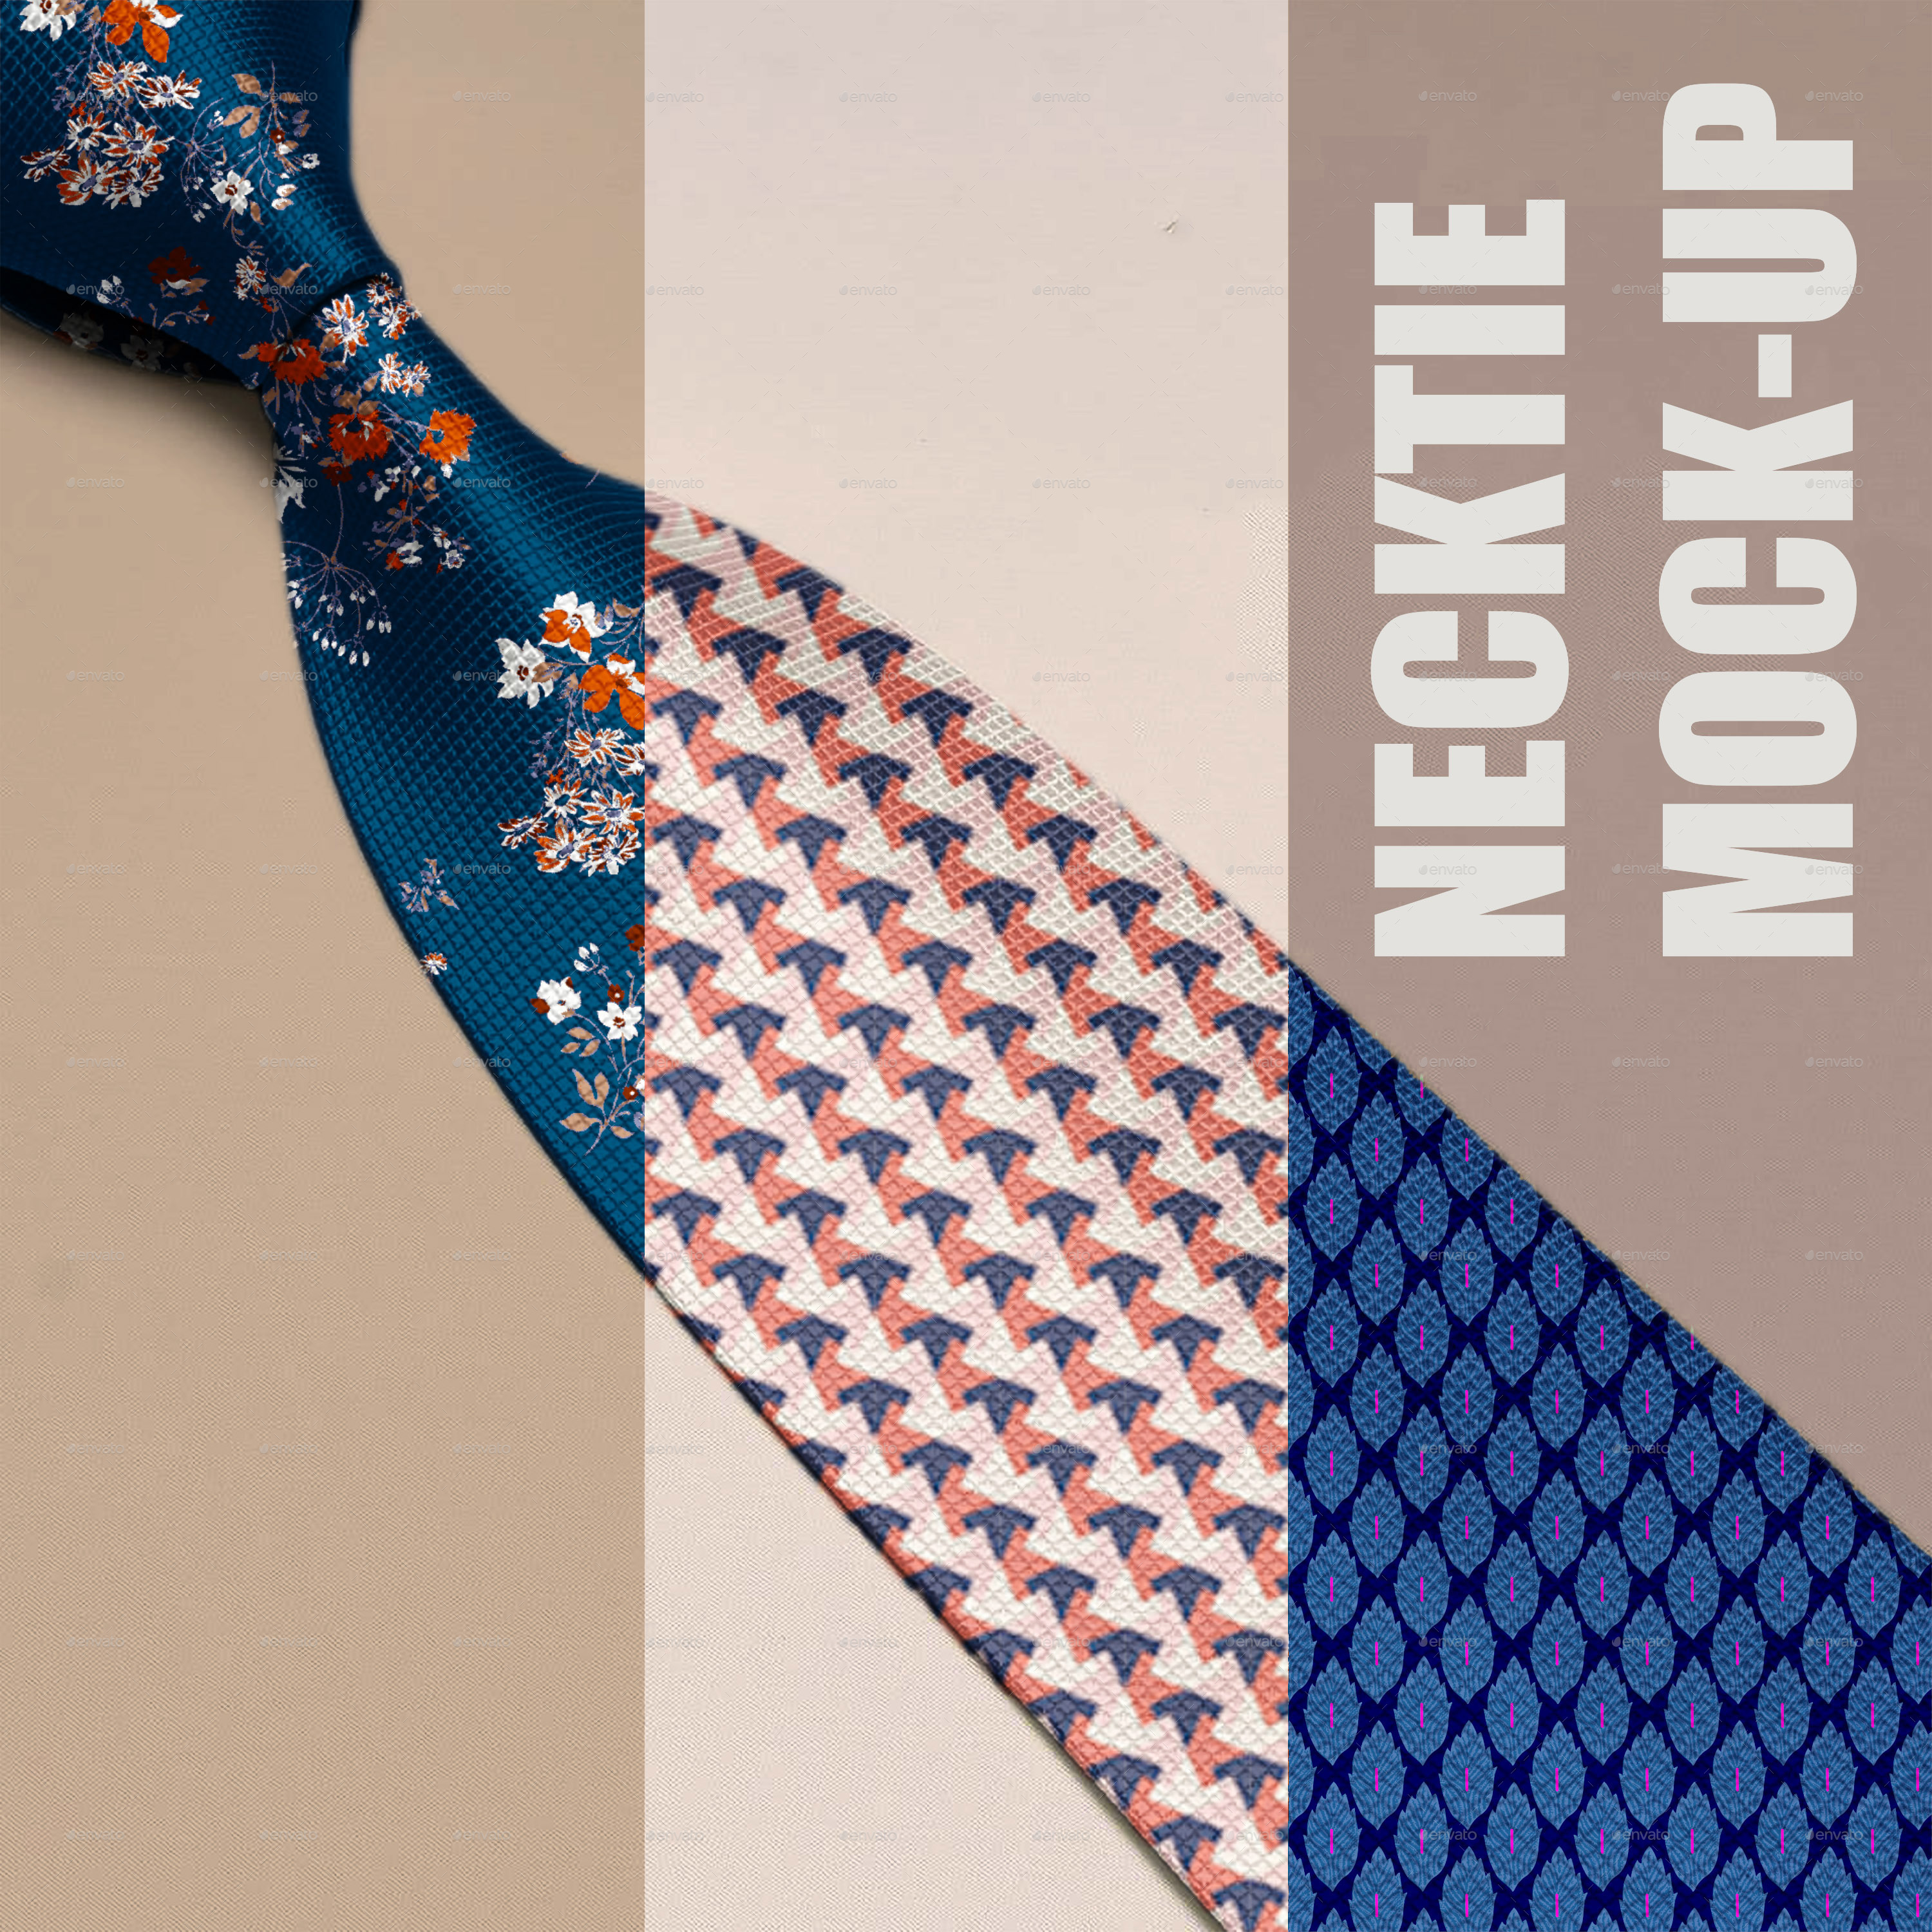 Download Necktie Mock Up By Backdoorlab In Graphicriver